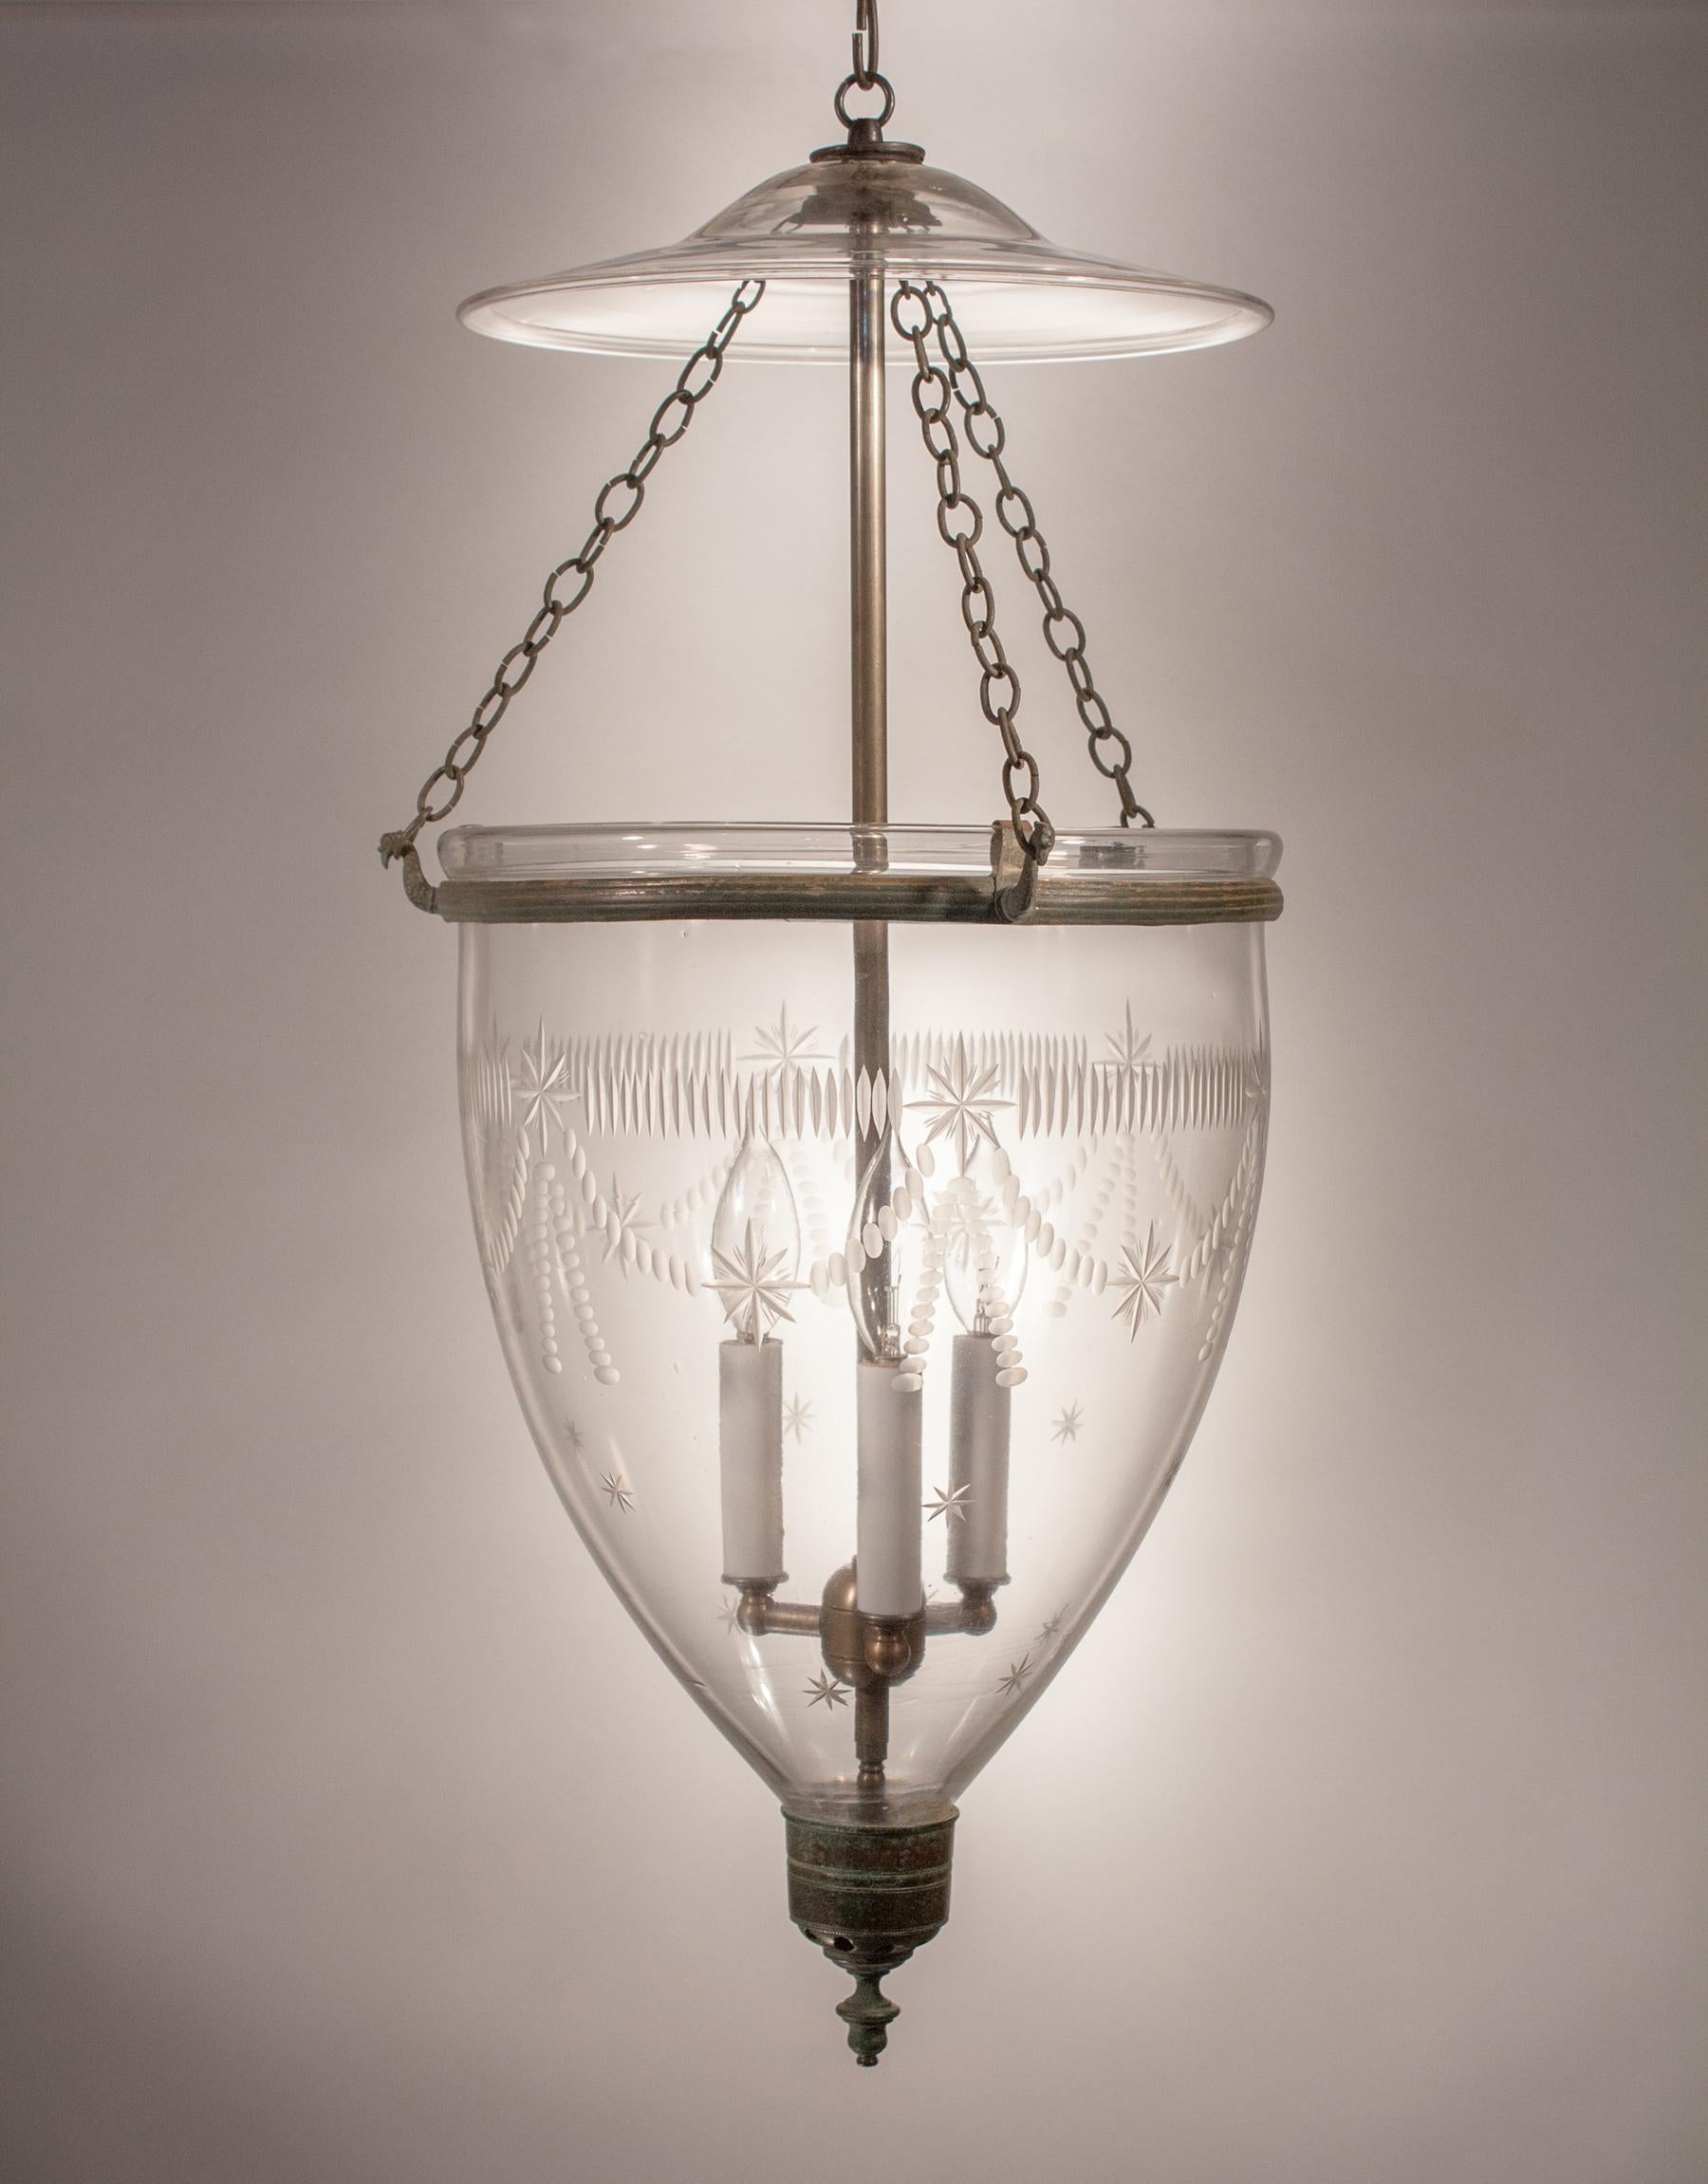 The quintessential antique hall lantern, this larger-sized bell jar lantern features superb form and a finely etched Federal-style motif in its handblown glass. The lantern has all-original fittings, including rolled brass band, brass finial and